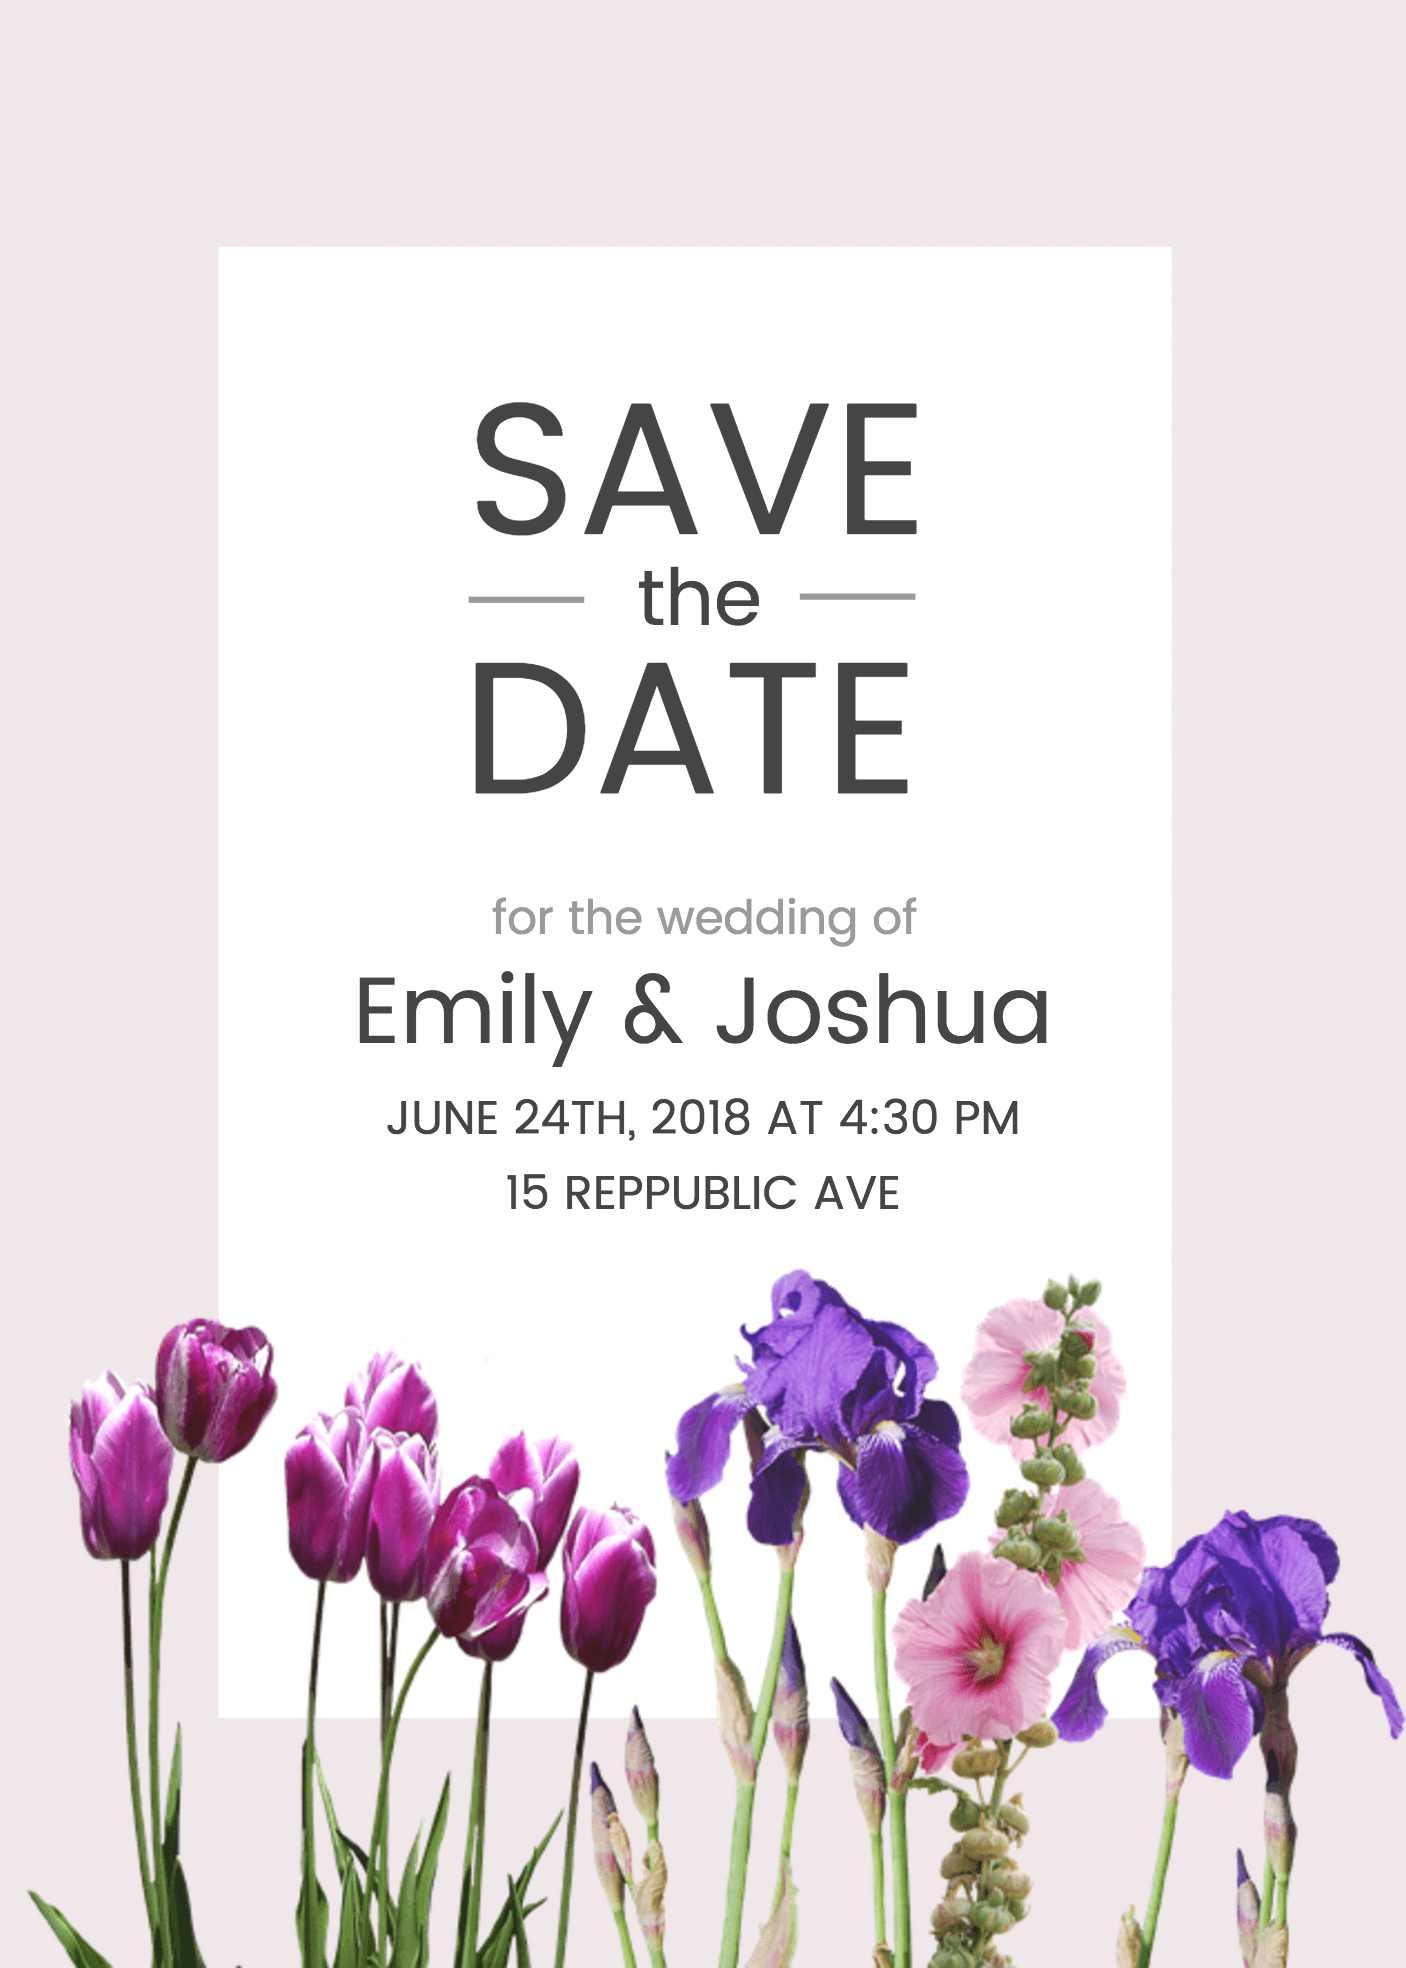 Floral Save The Date Invitation Template Venngage with dimensions 1406 X 1968